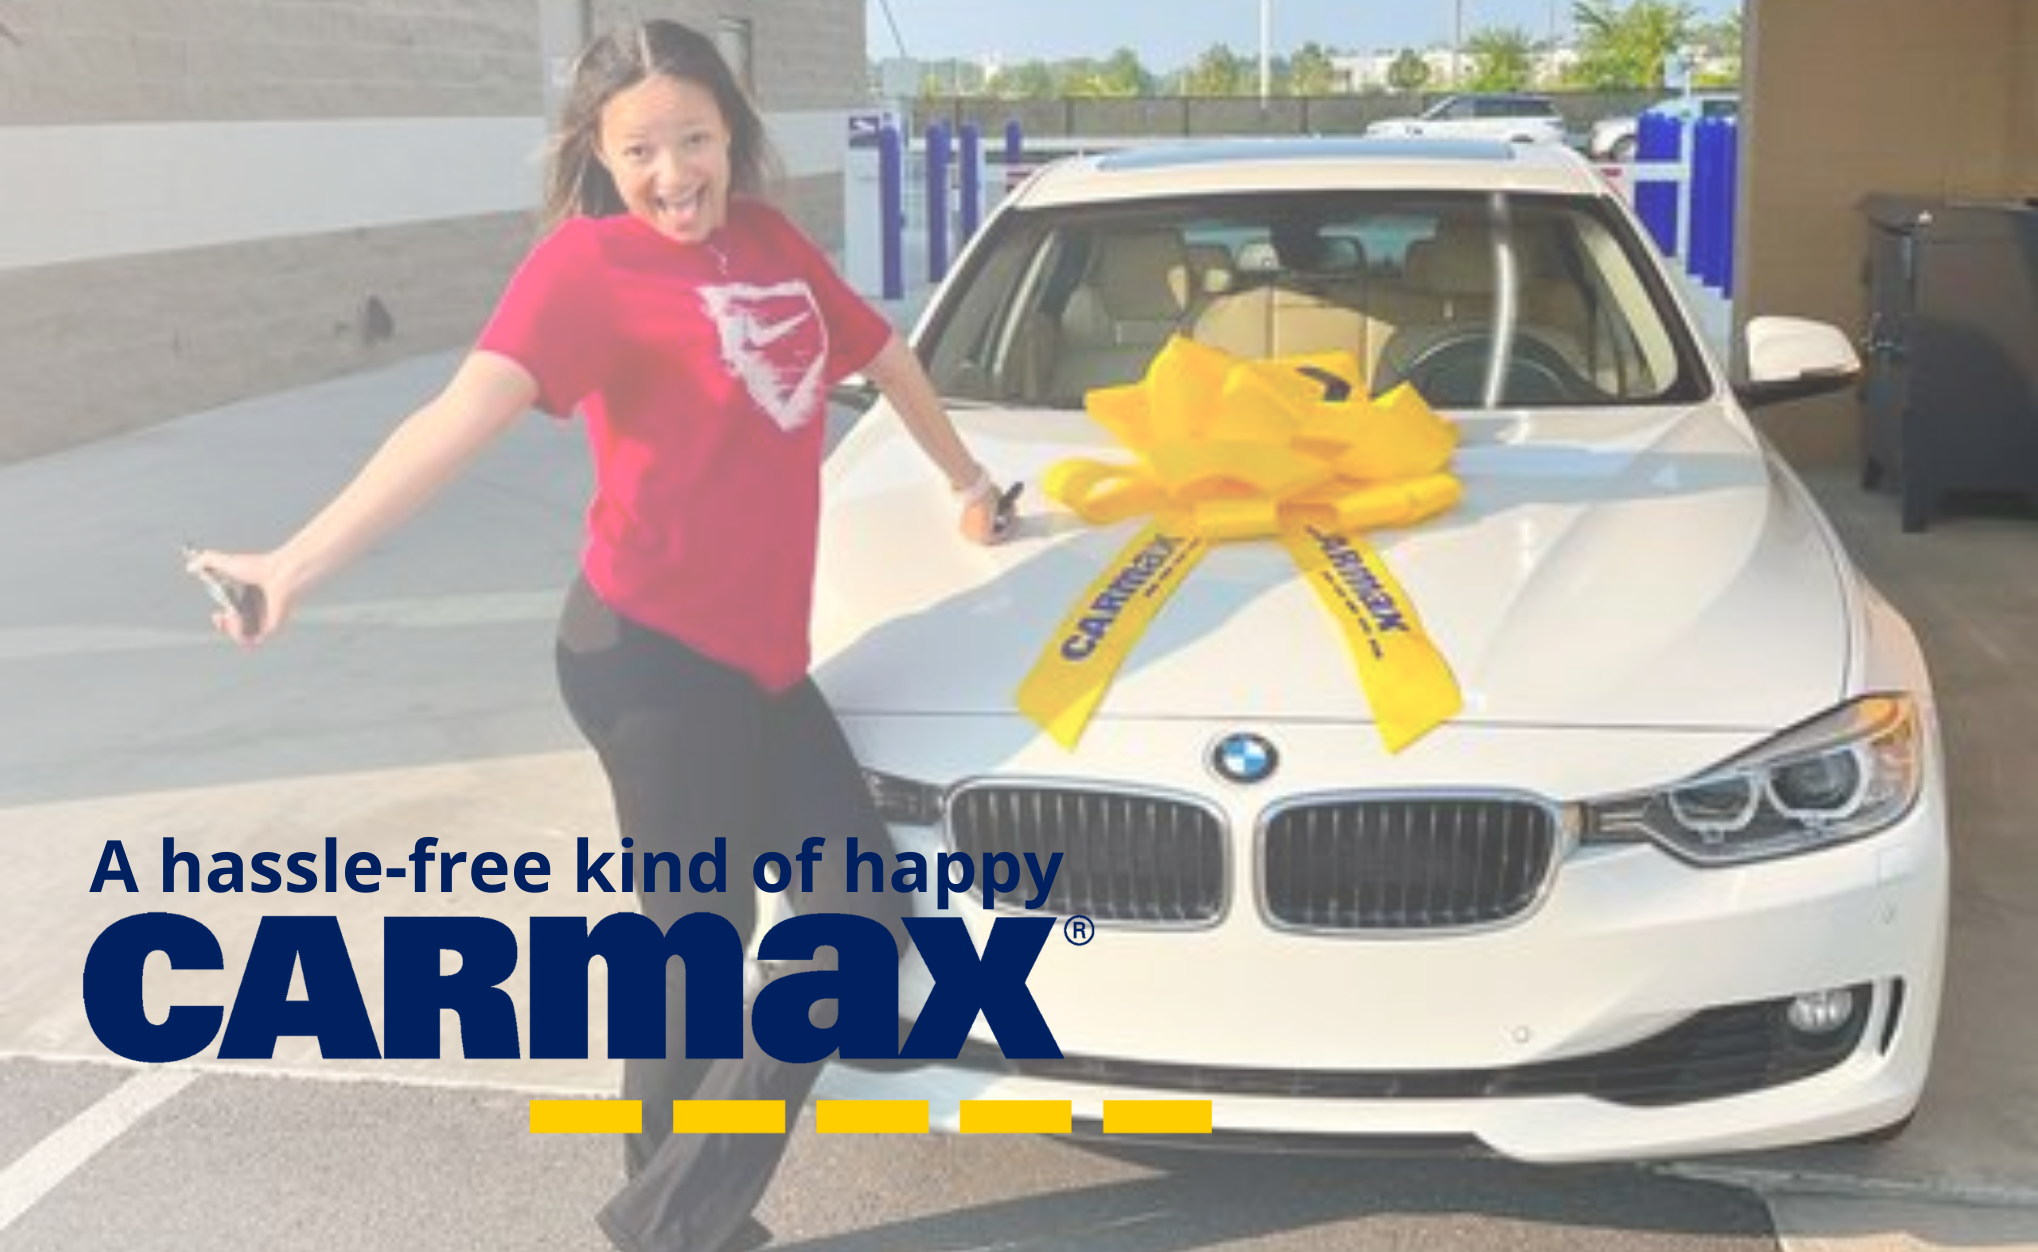 A hassle-free kind of happy - Carmax